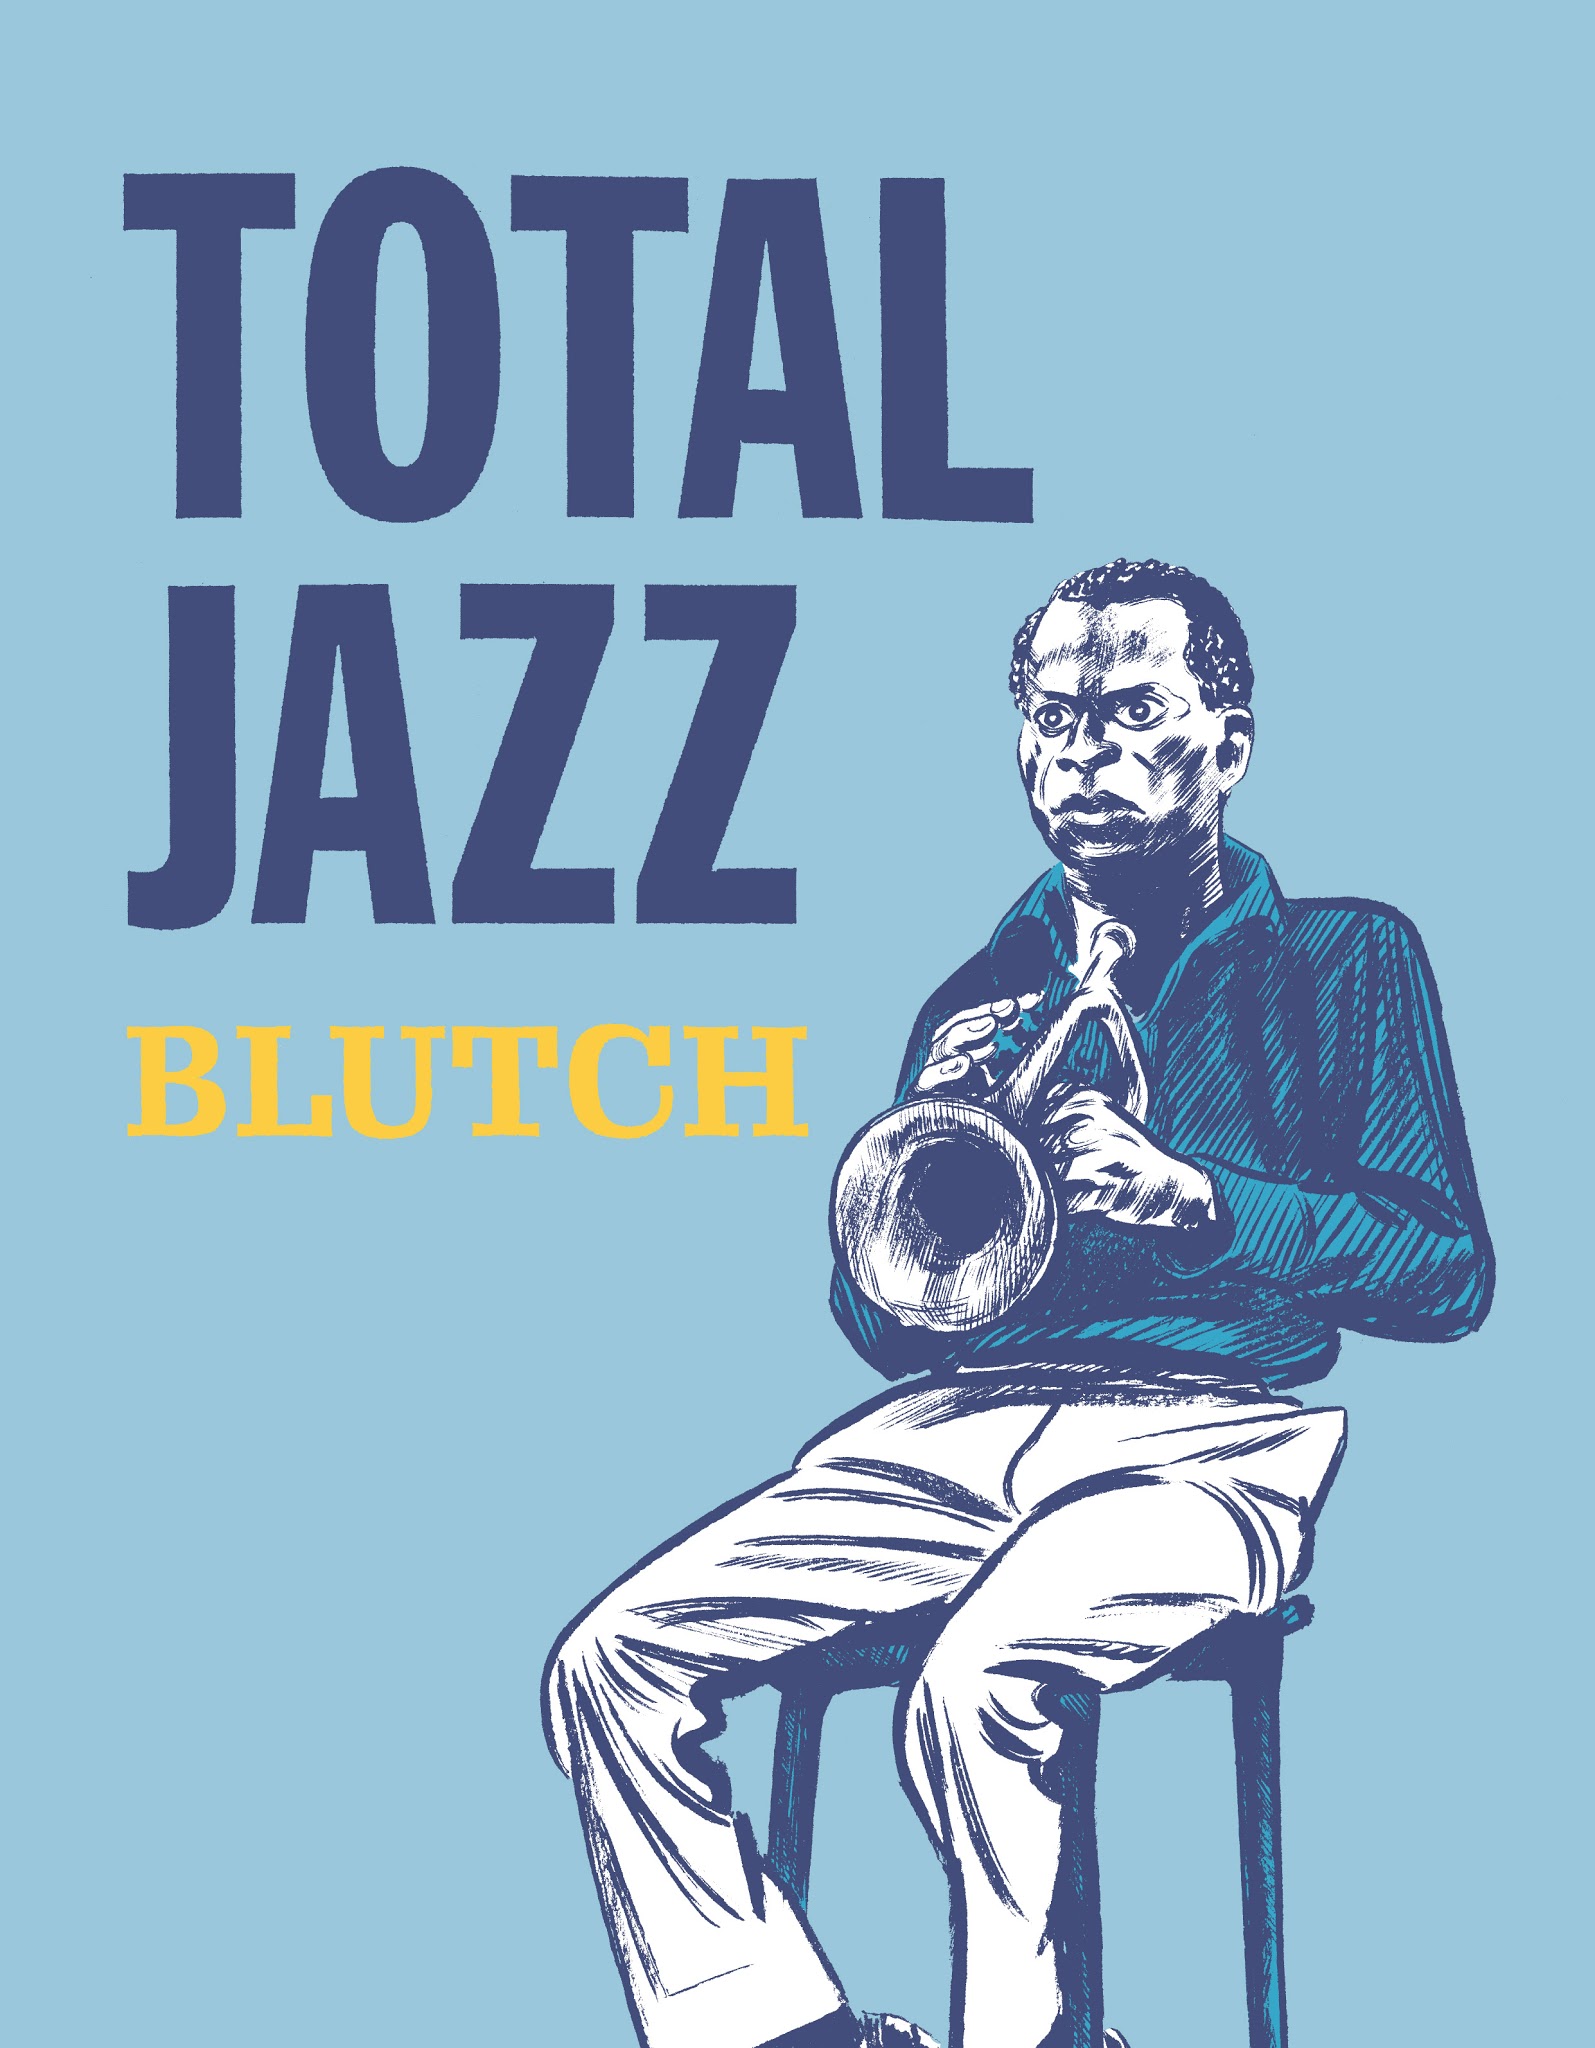 Read online Total Jazz comic -  Issue # TPB - 1